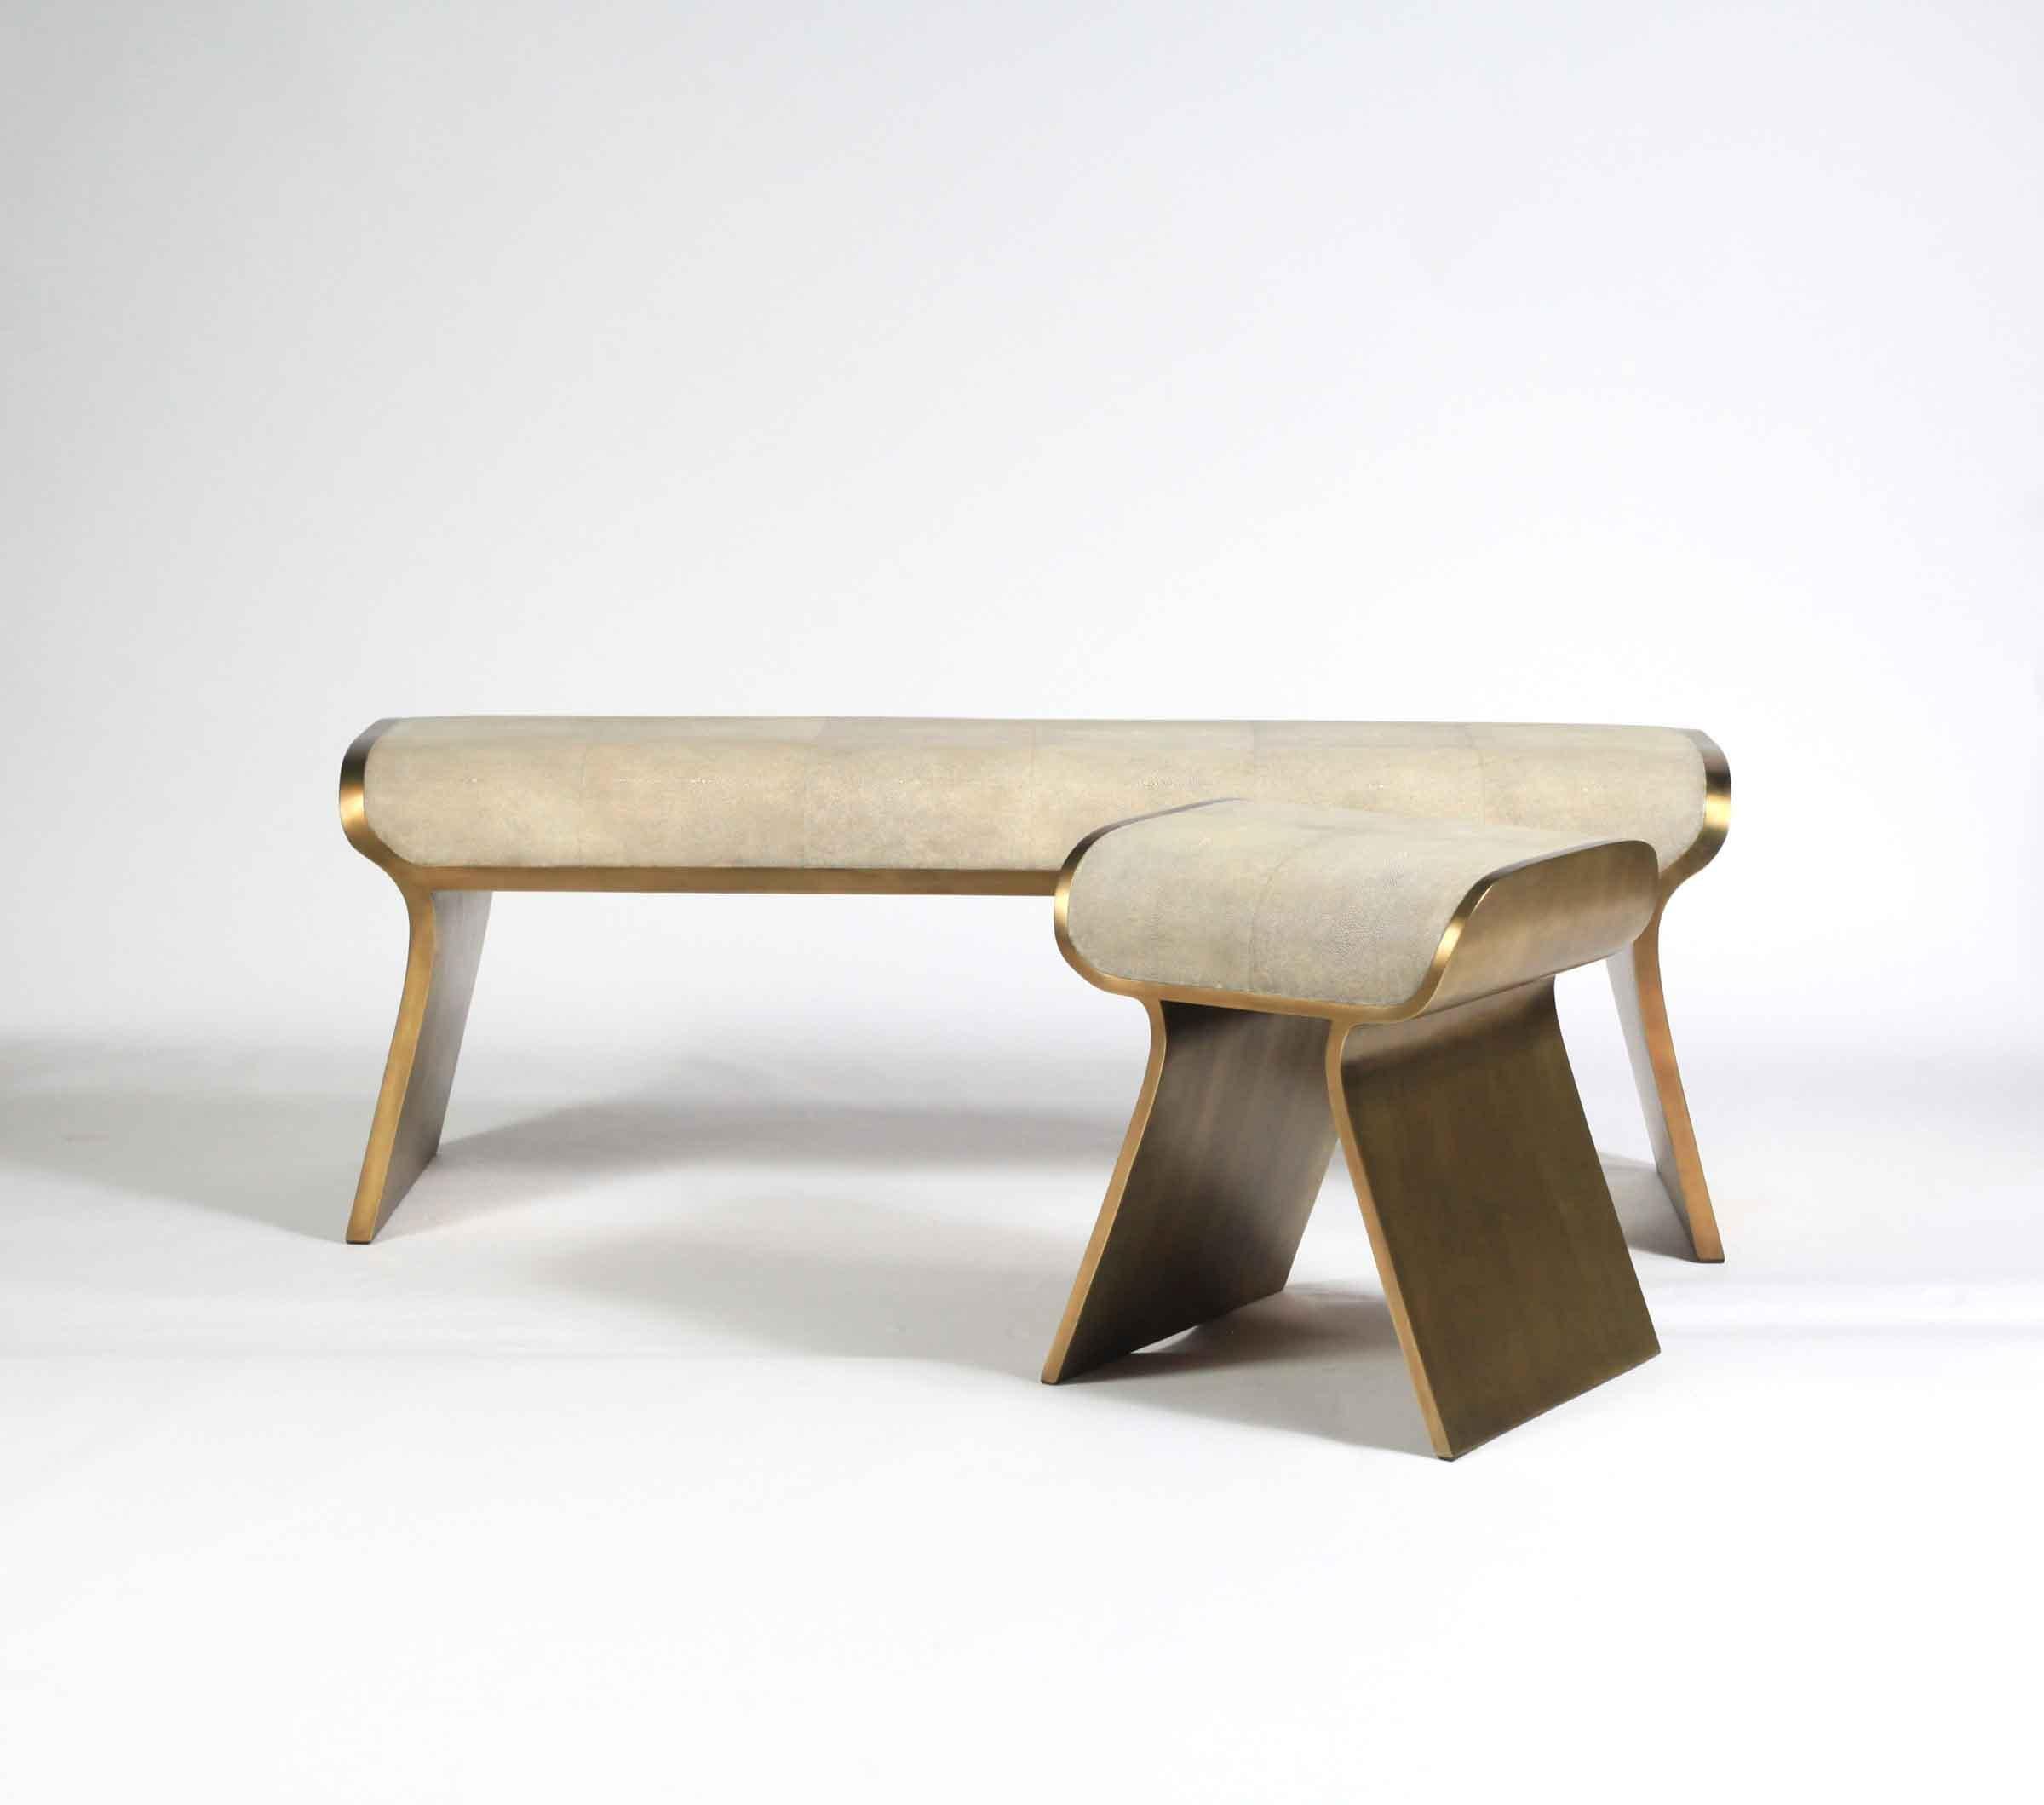 Hand-Crafted Dandy Day Bench in Celadon Shagreen and Bronze-Patina Brass by Kifu, Paris For Sale